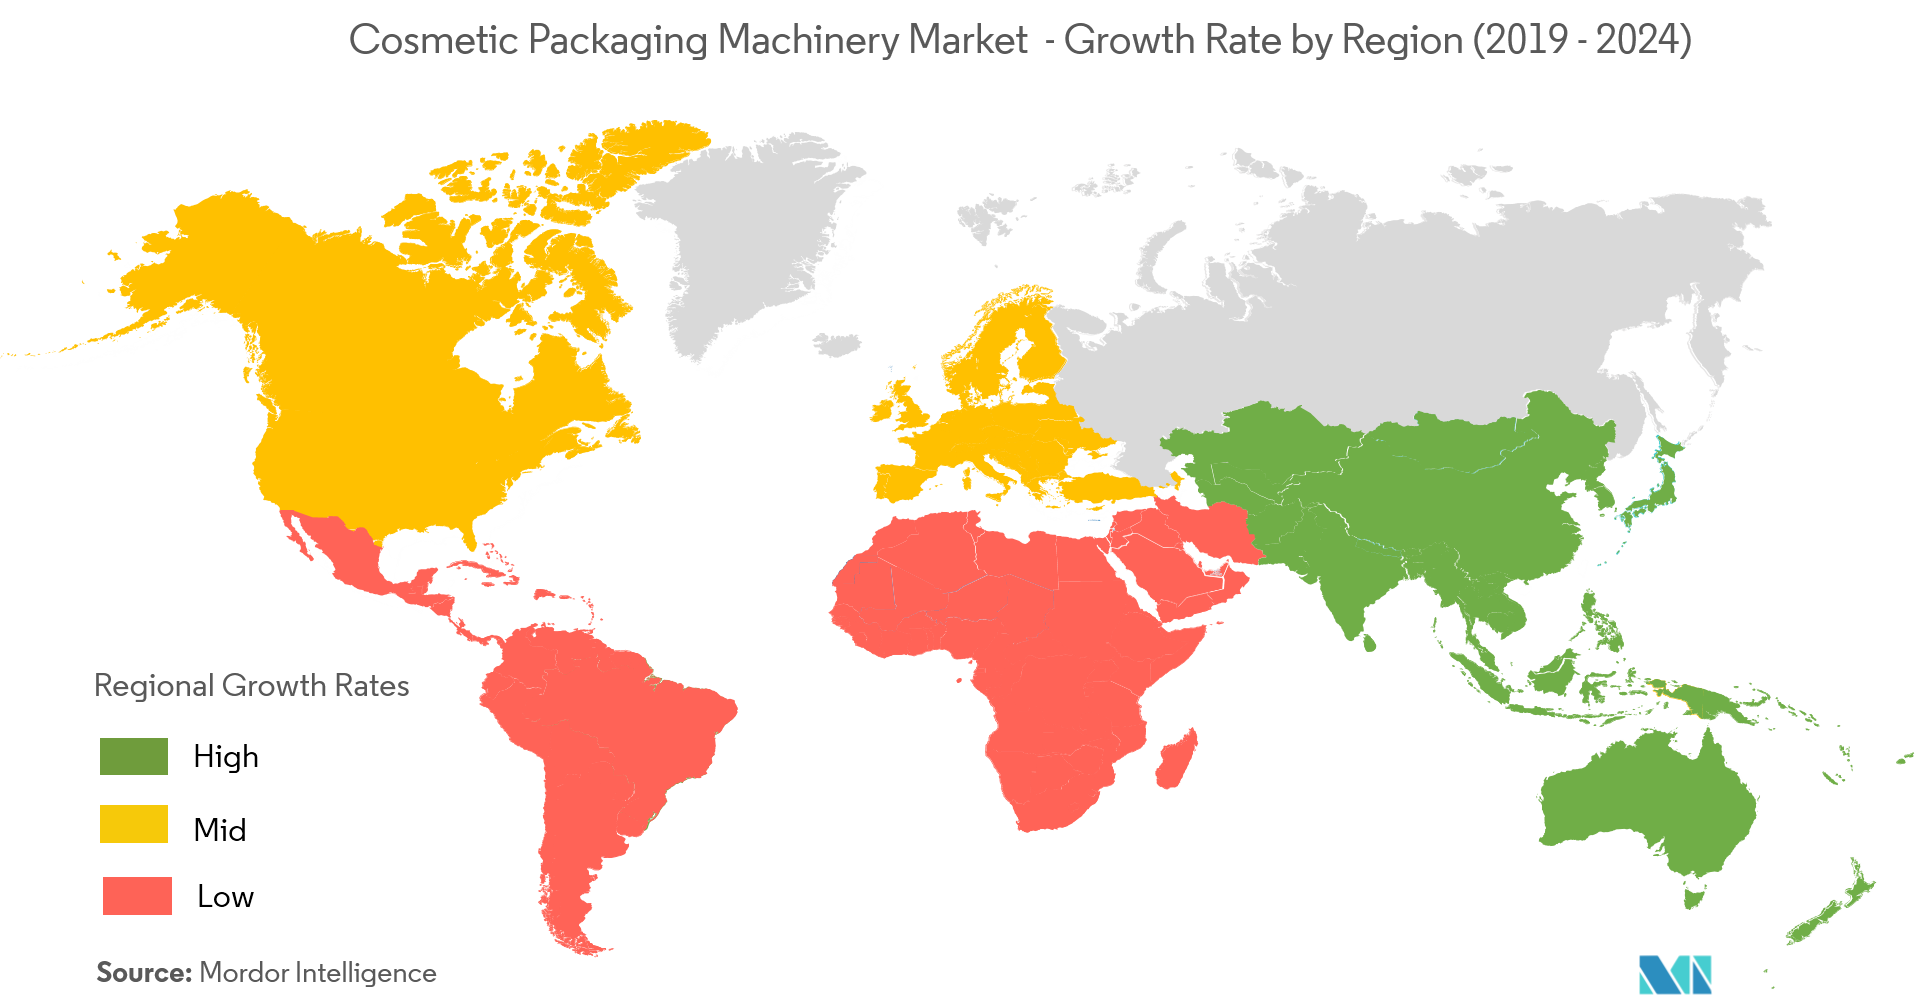 Cosmetic Packaging Machinery Market Growth by Region